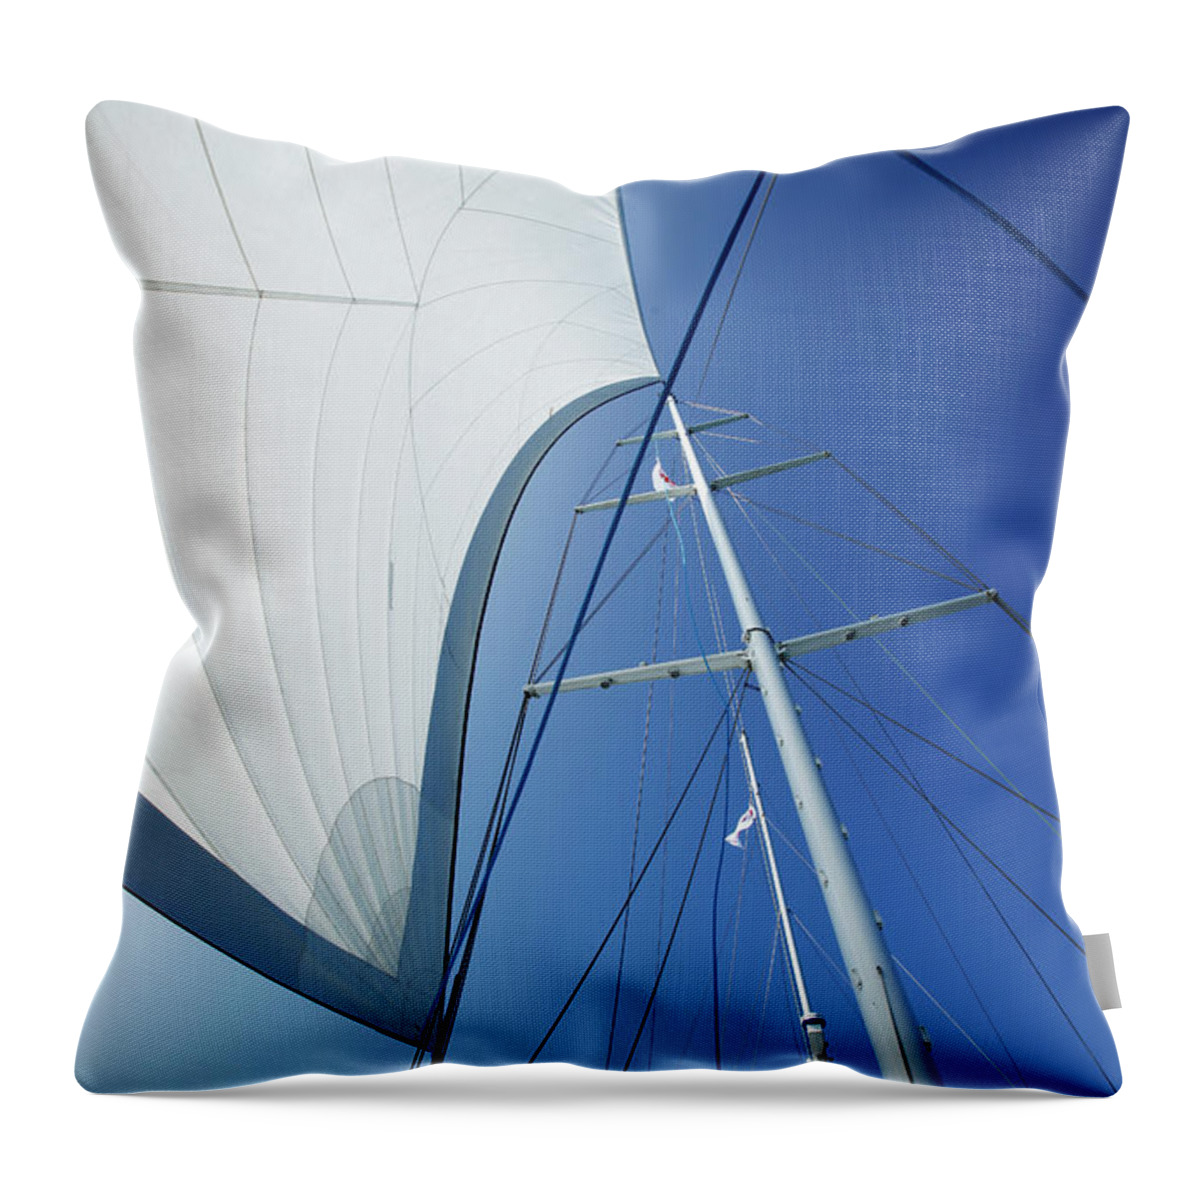 Cairns Throw Pillow featuring the photograph White Yacht Sail Against Blue Sky by John White Photos